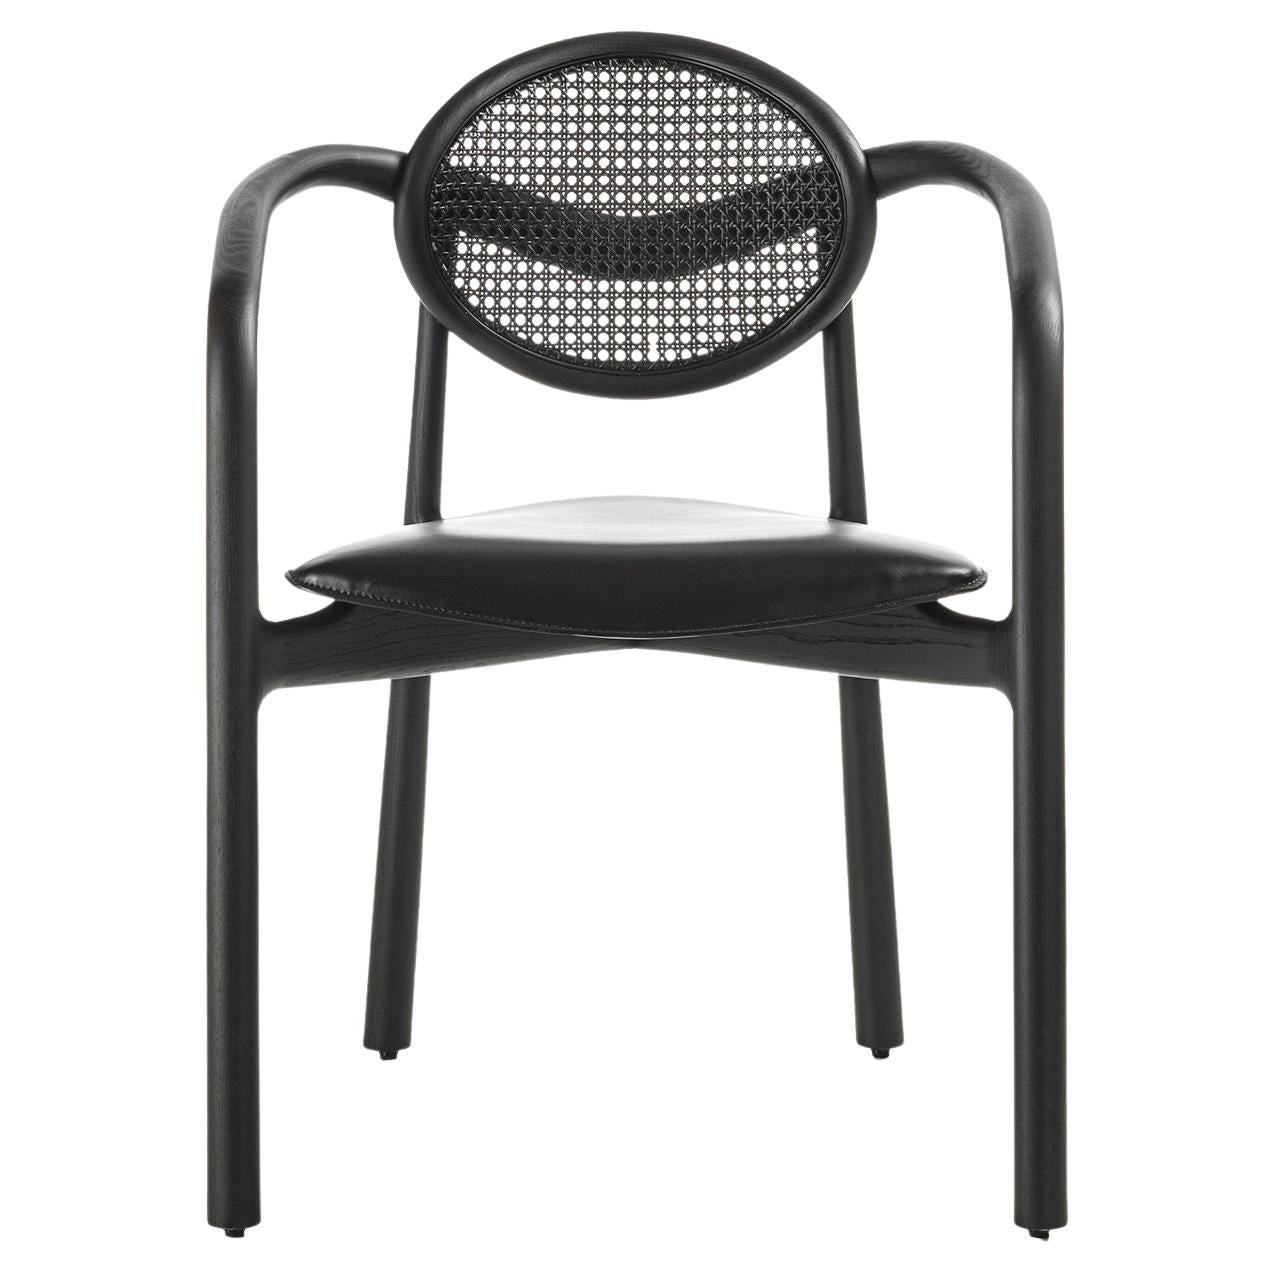 Marlena Black Chair with Arms by Studio Nove.3 For Sale